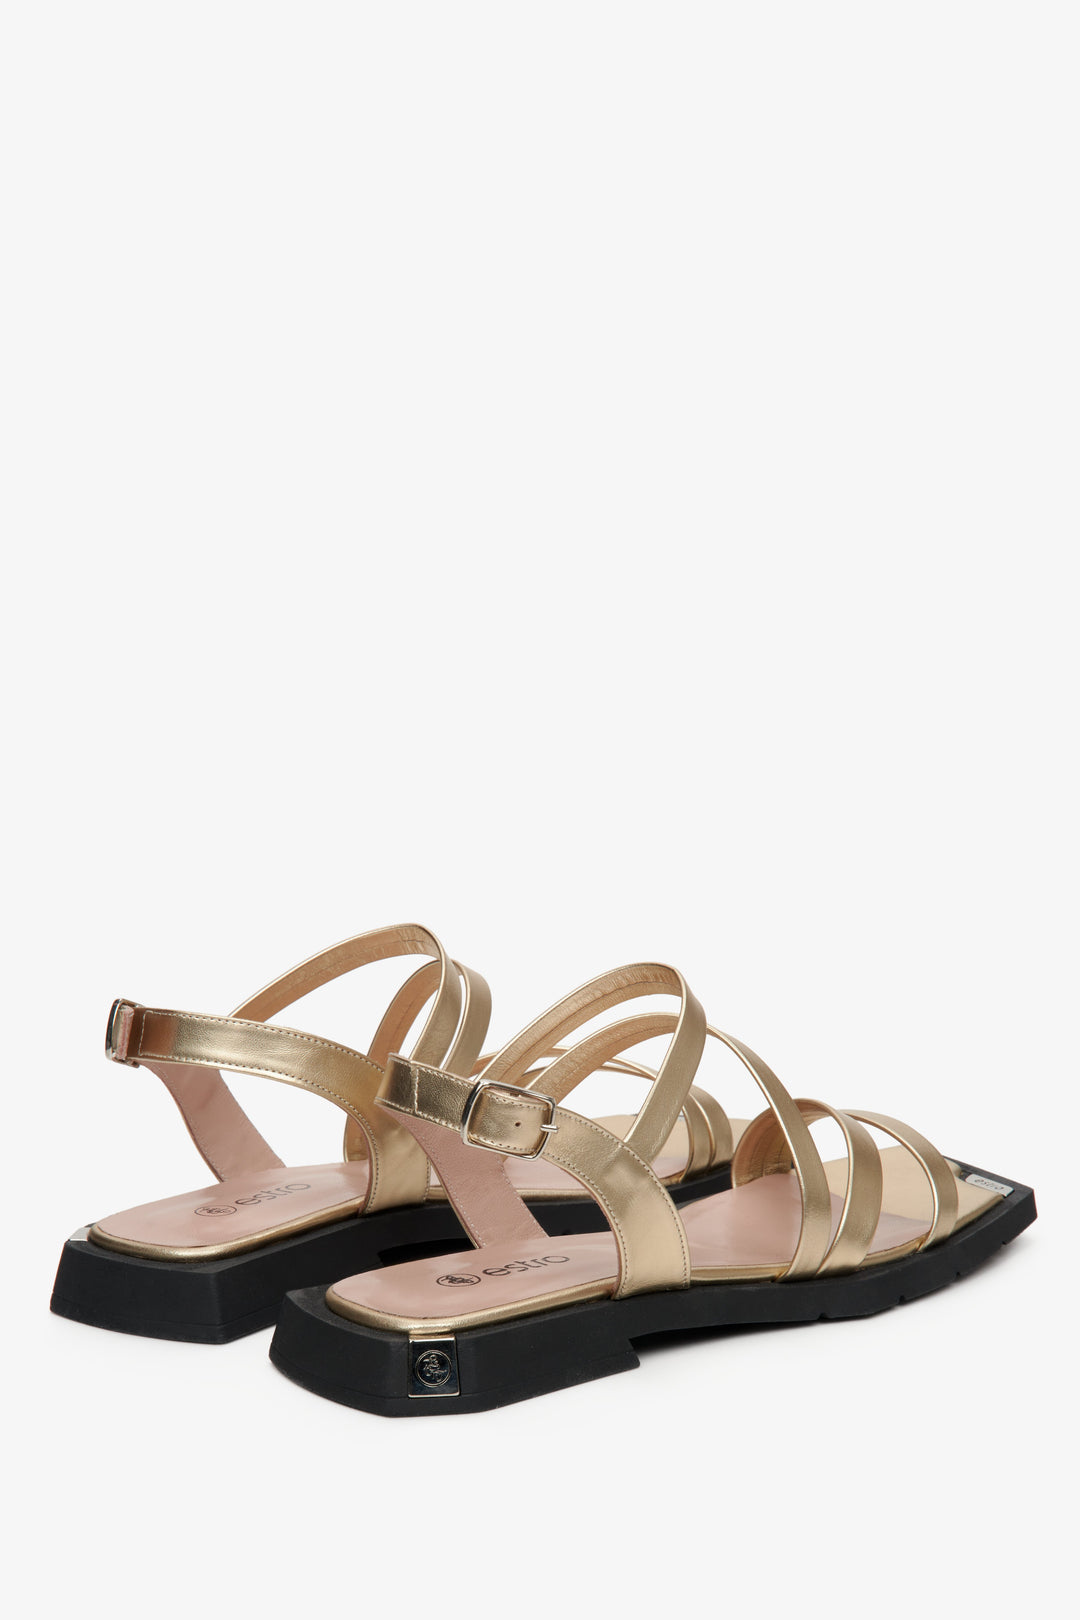 Leather, women's metallic sandals by Estro with thin straps - presentation of the back part of the shoes.